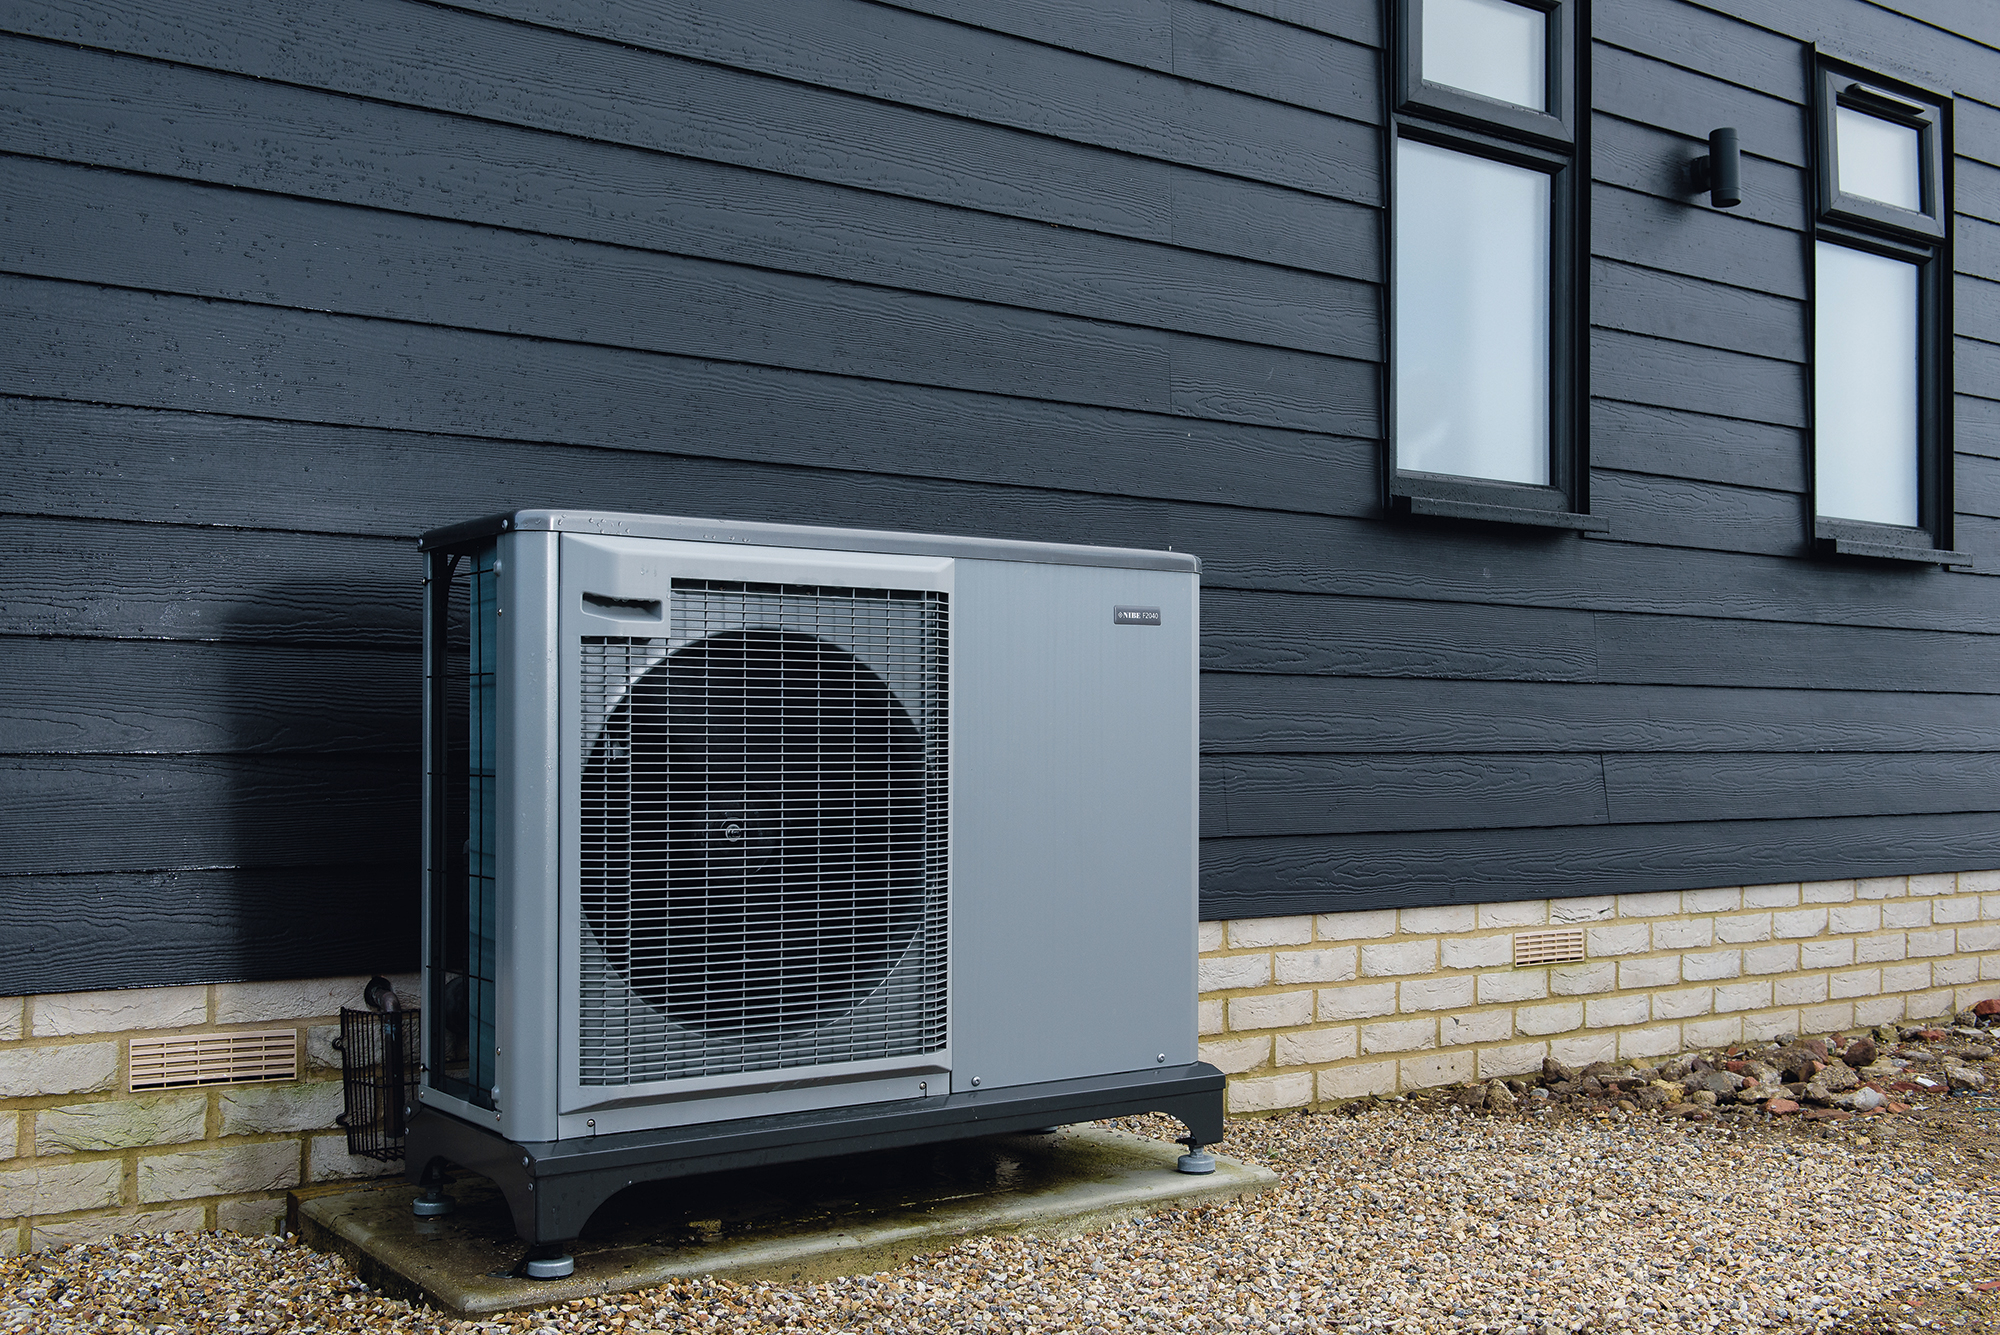 Why Heat Pumps Will Raise Your Energy Bills | NOT A LOT OF PEOPLE KNOW THAT